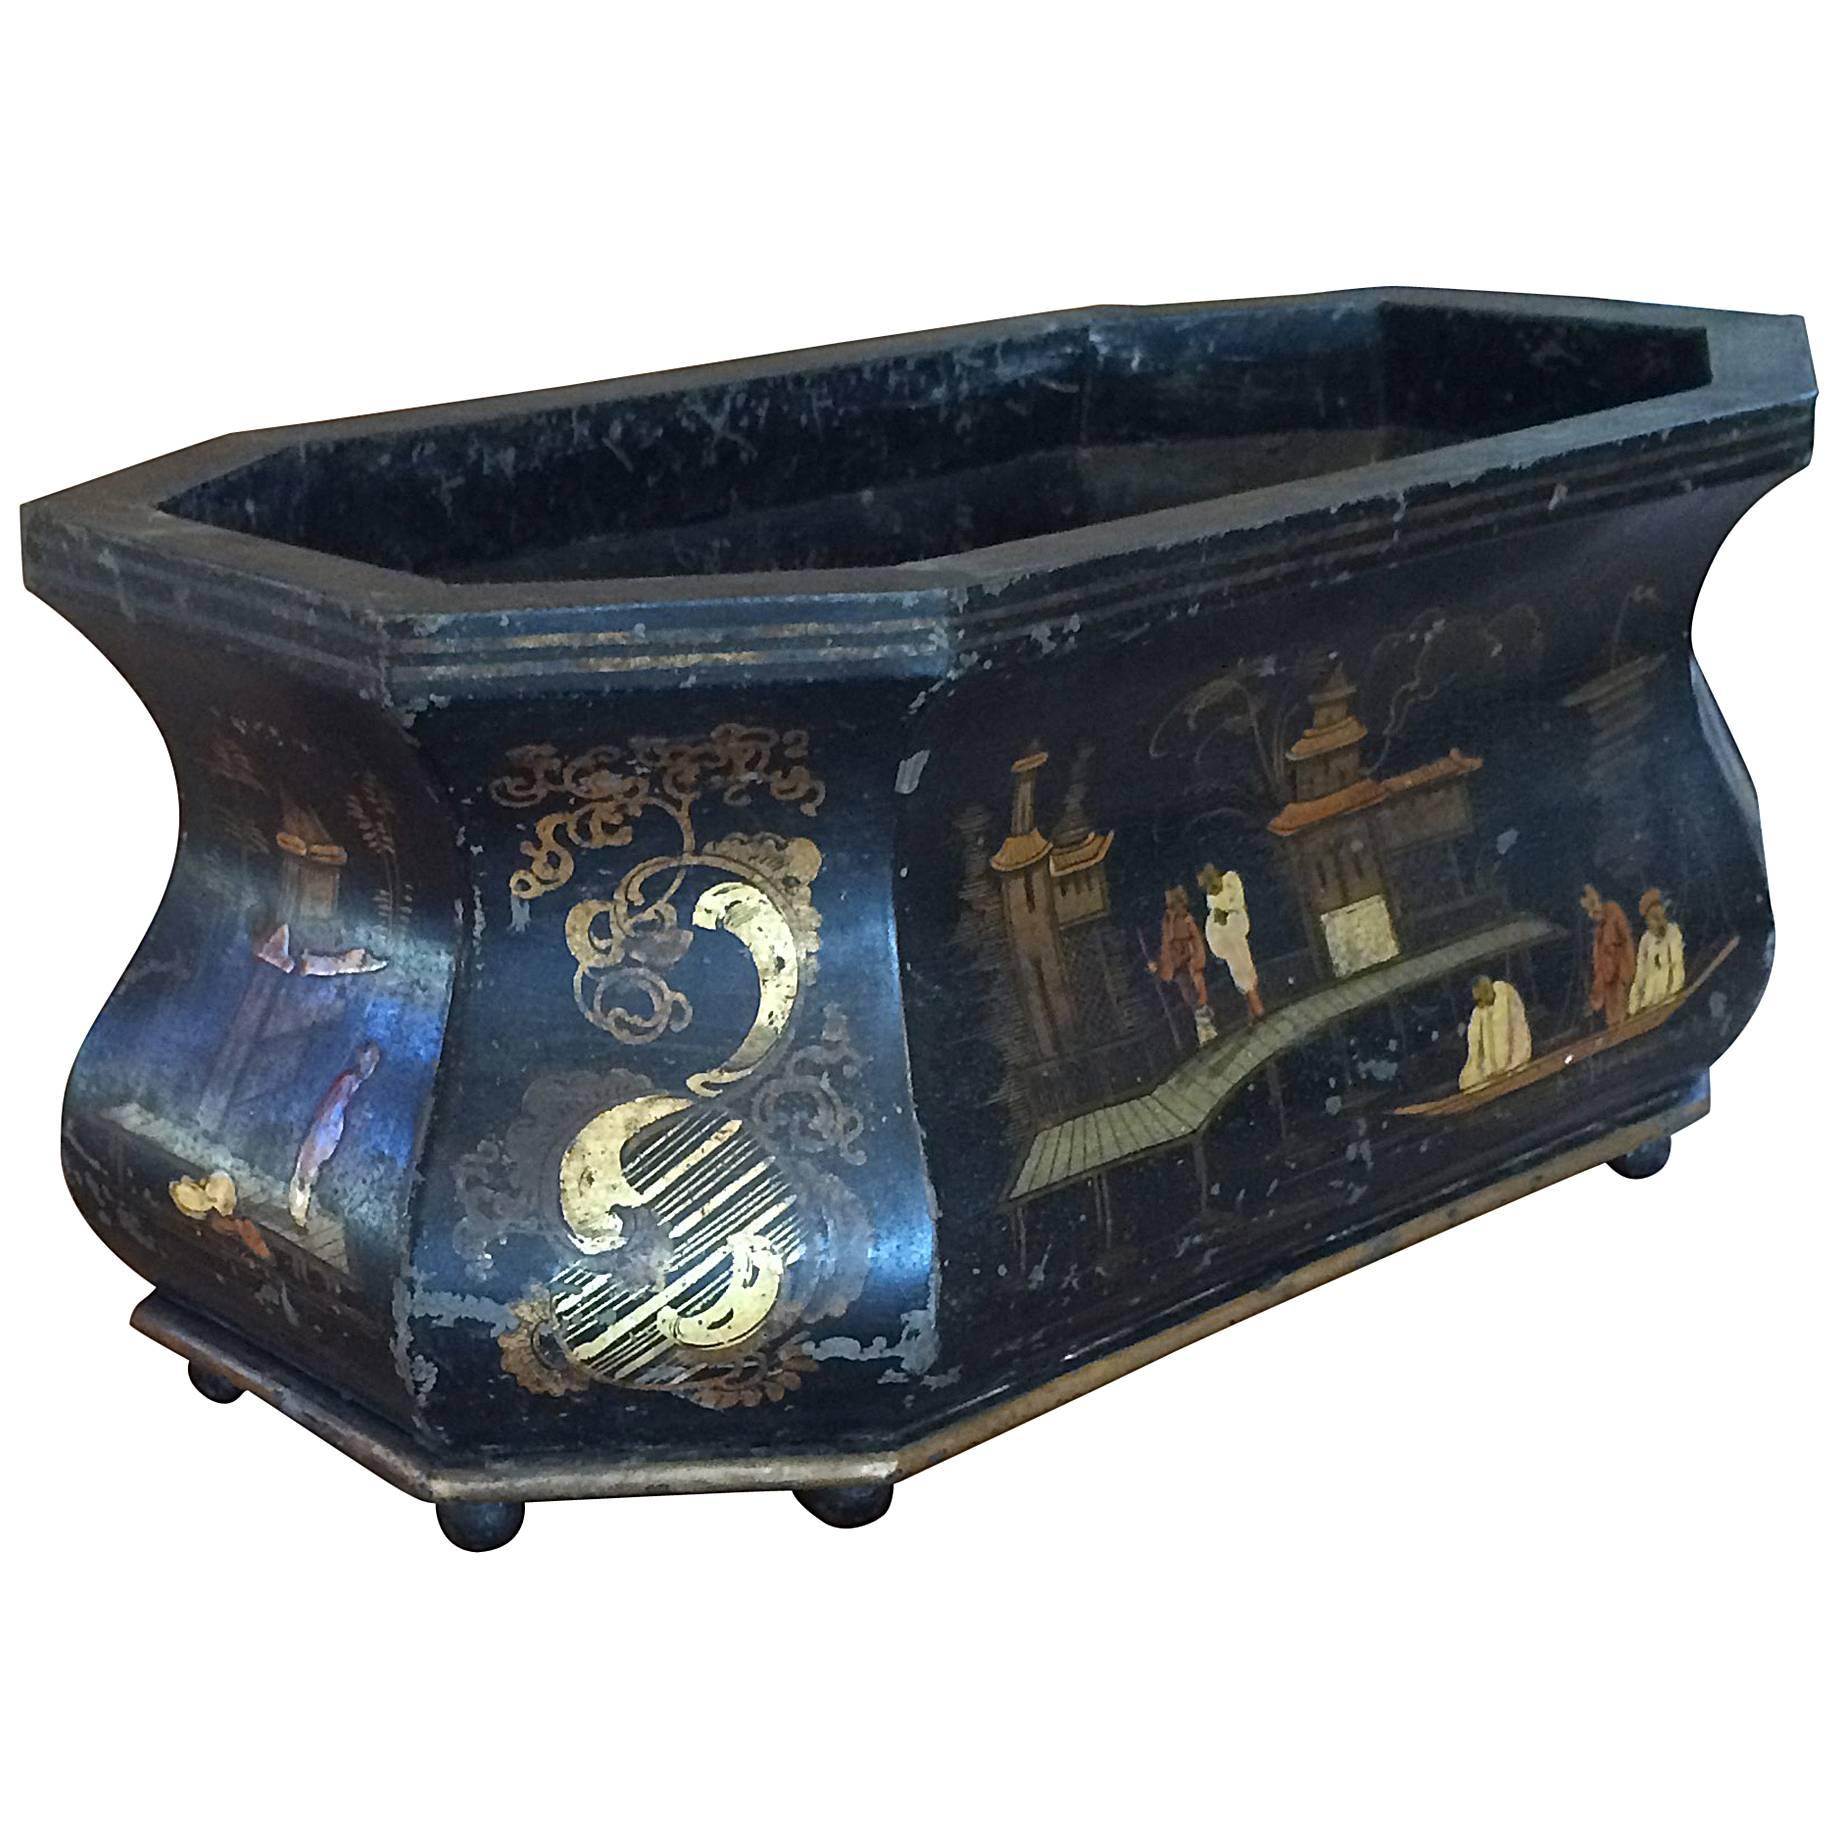 Very rare octagonal oval shaped Japanned tole jardiniere with chinoiserie imagery; ball feet; 19th century.